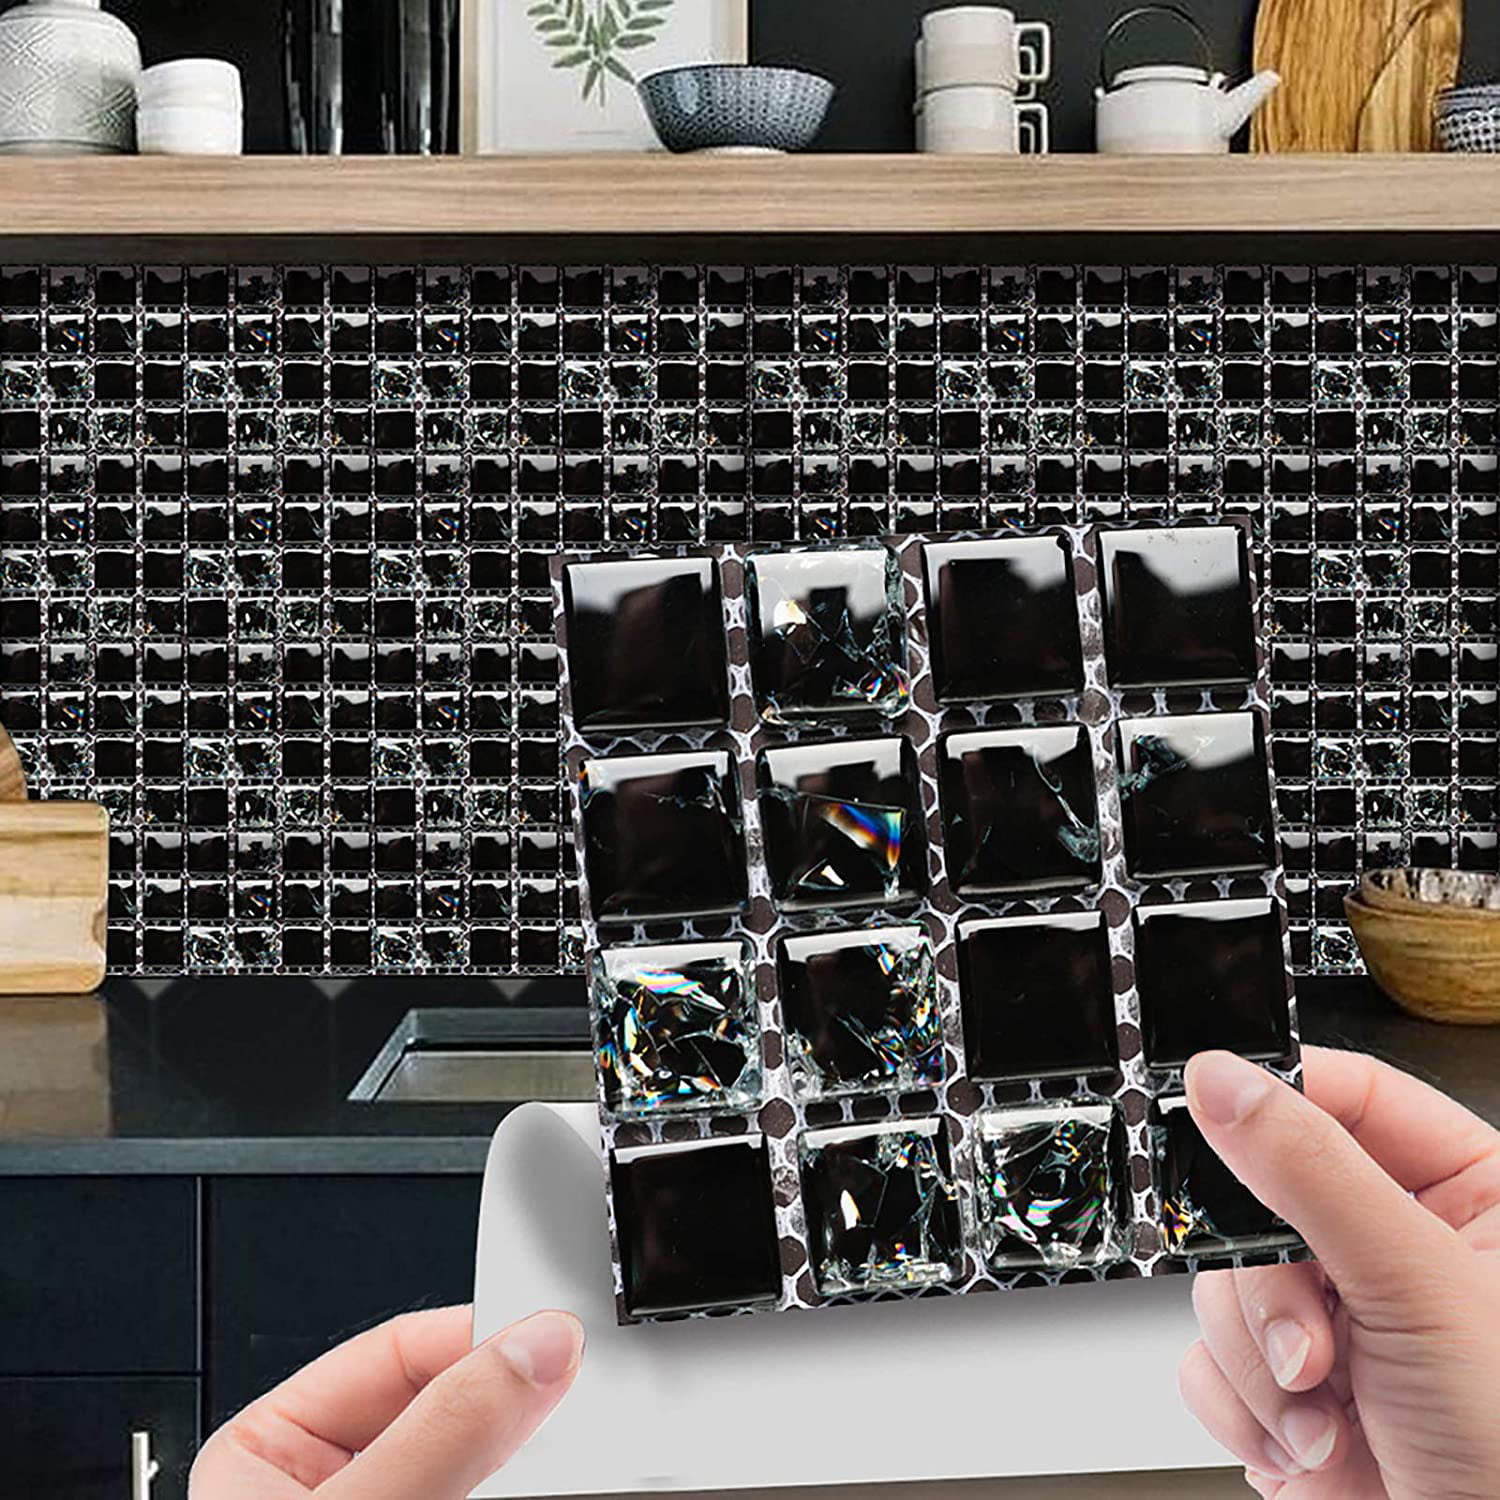 PACK OF 10 BLACK MARBLE effect Mosaic tile transfers STICKERS HIGH QUALITY peel and stick transform your bathroom or kitchen